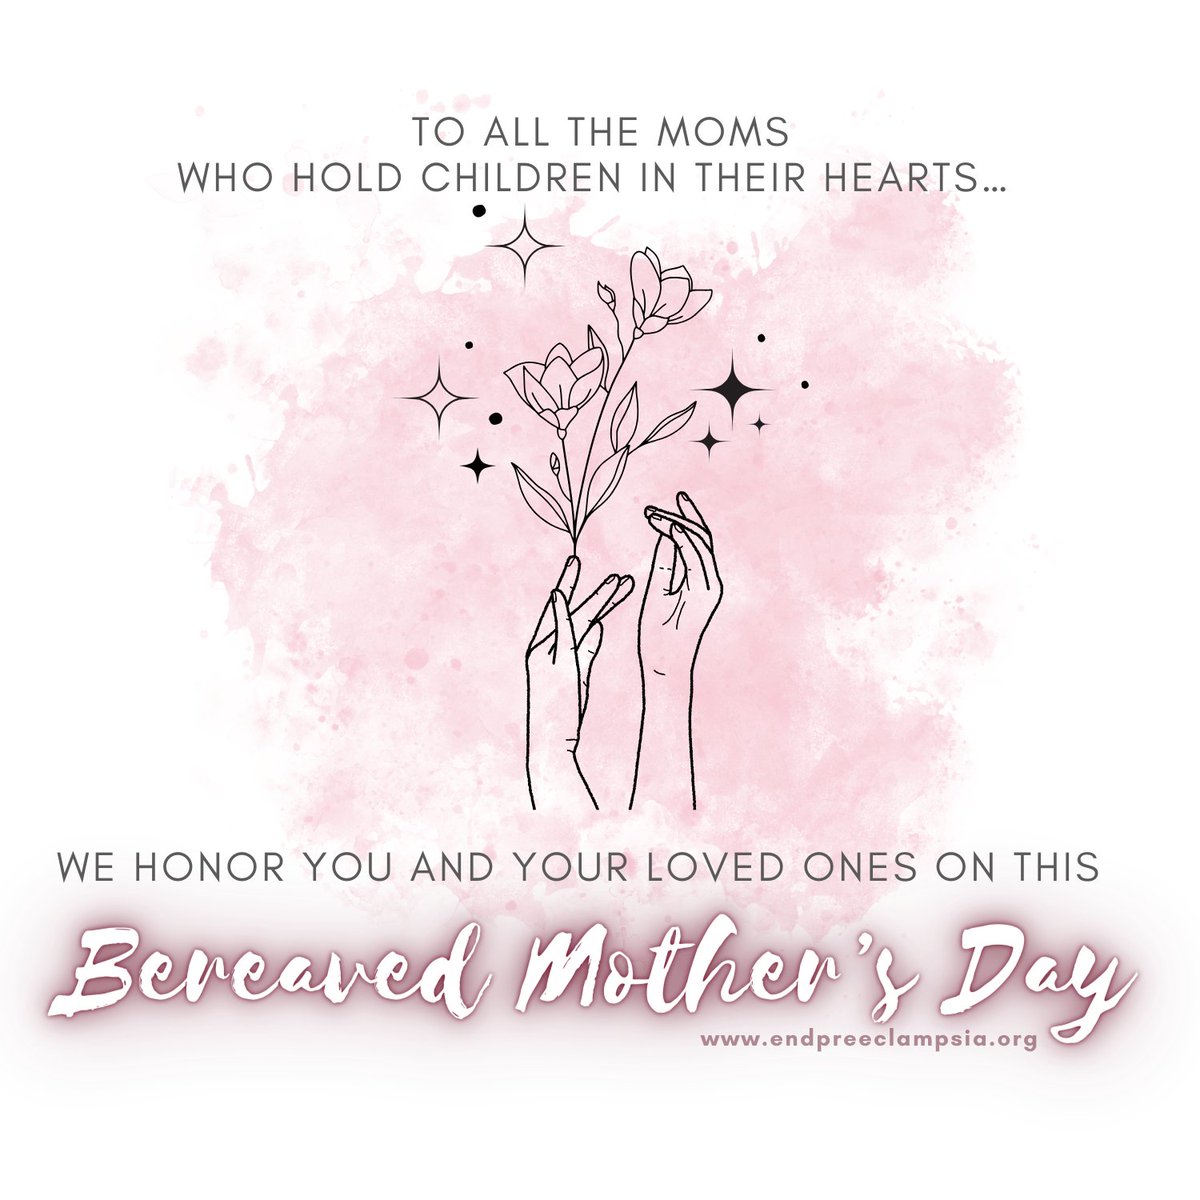 The 1st Sunday in May is #InternationalBereavedMothersDay 
For all mothers who are missing a child gone too soon, we hold space here for you.
#BereavedMothersDay #PreeclampsiaAwarenessMonth #YourBabyCounts #YourExperienceCounts #preeclampsia #eclampsia #HELLP #EndPreeclampsia